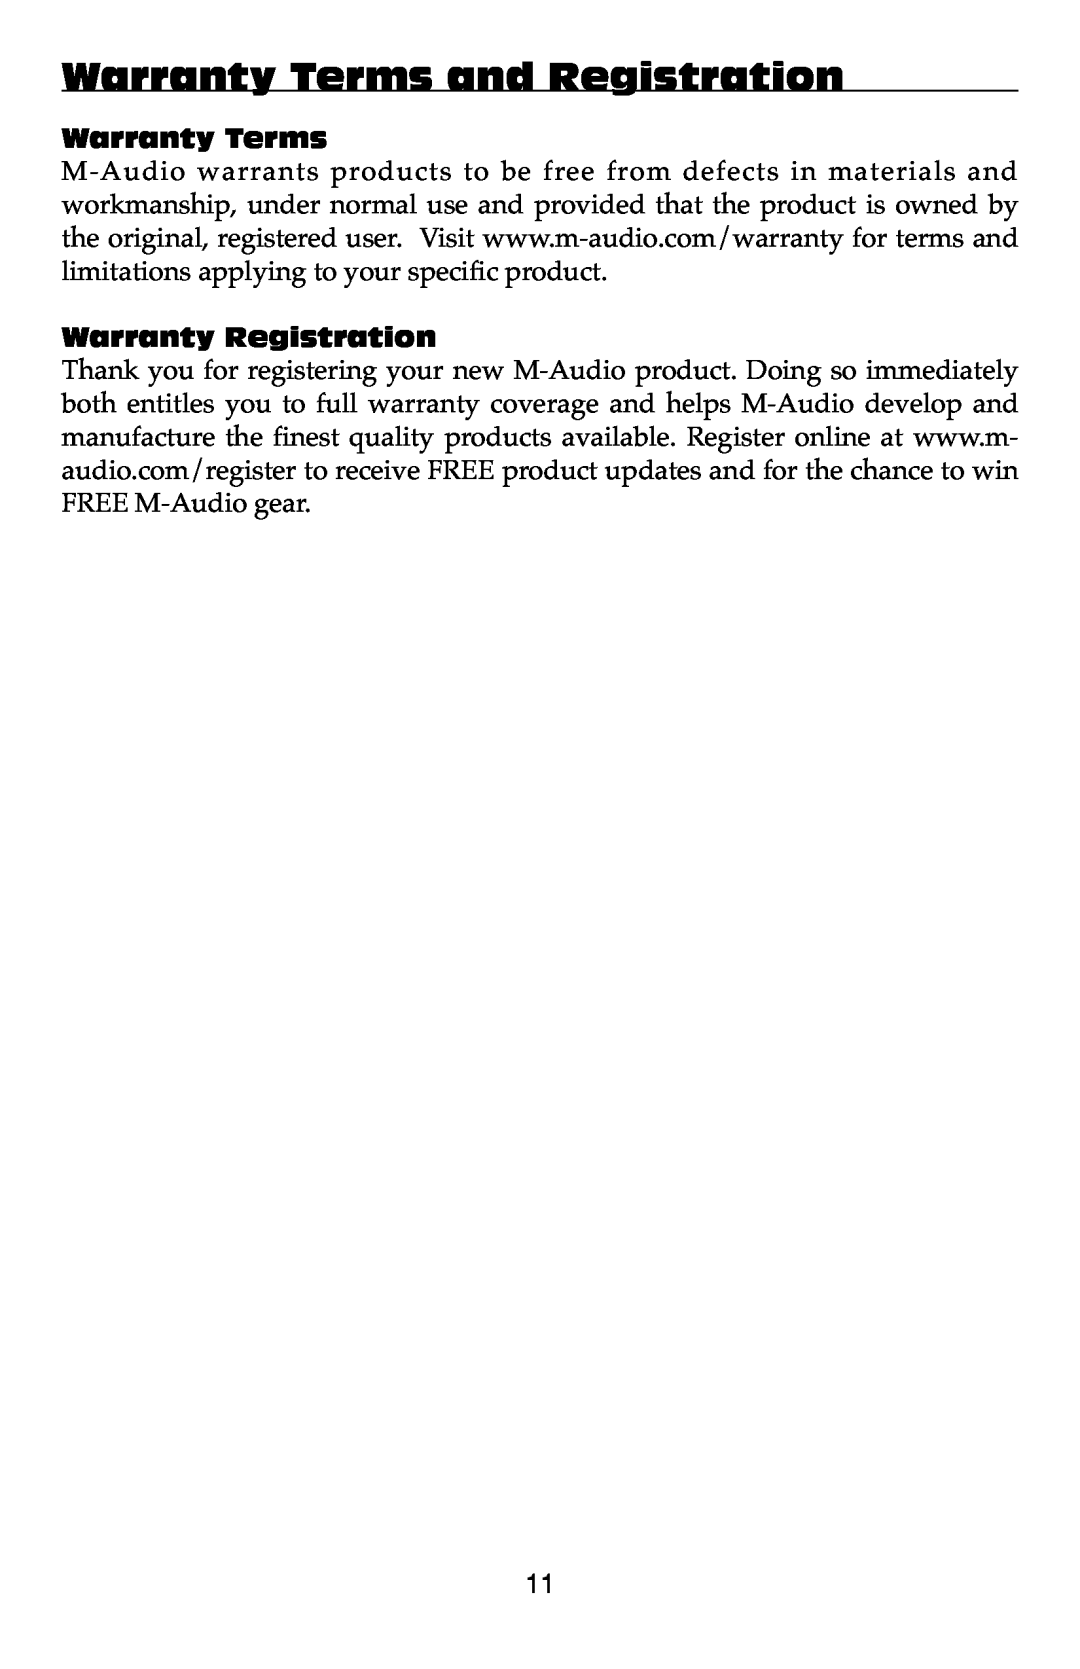 M-Audio TC9820PHI warranty Warranty Terms and Registration 